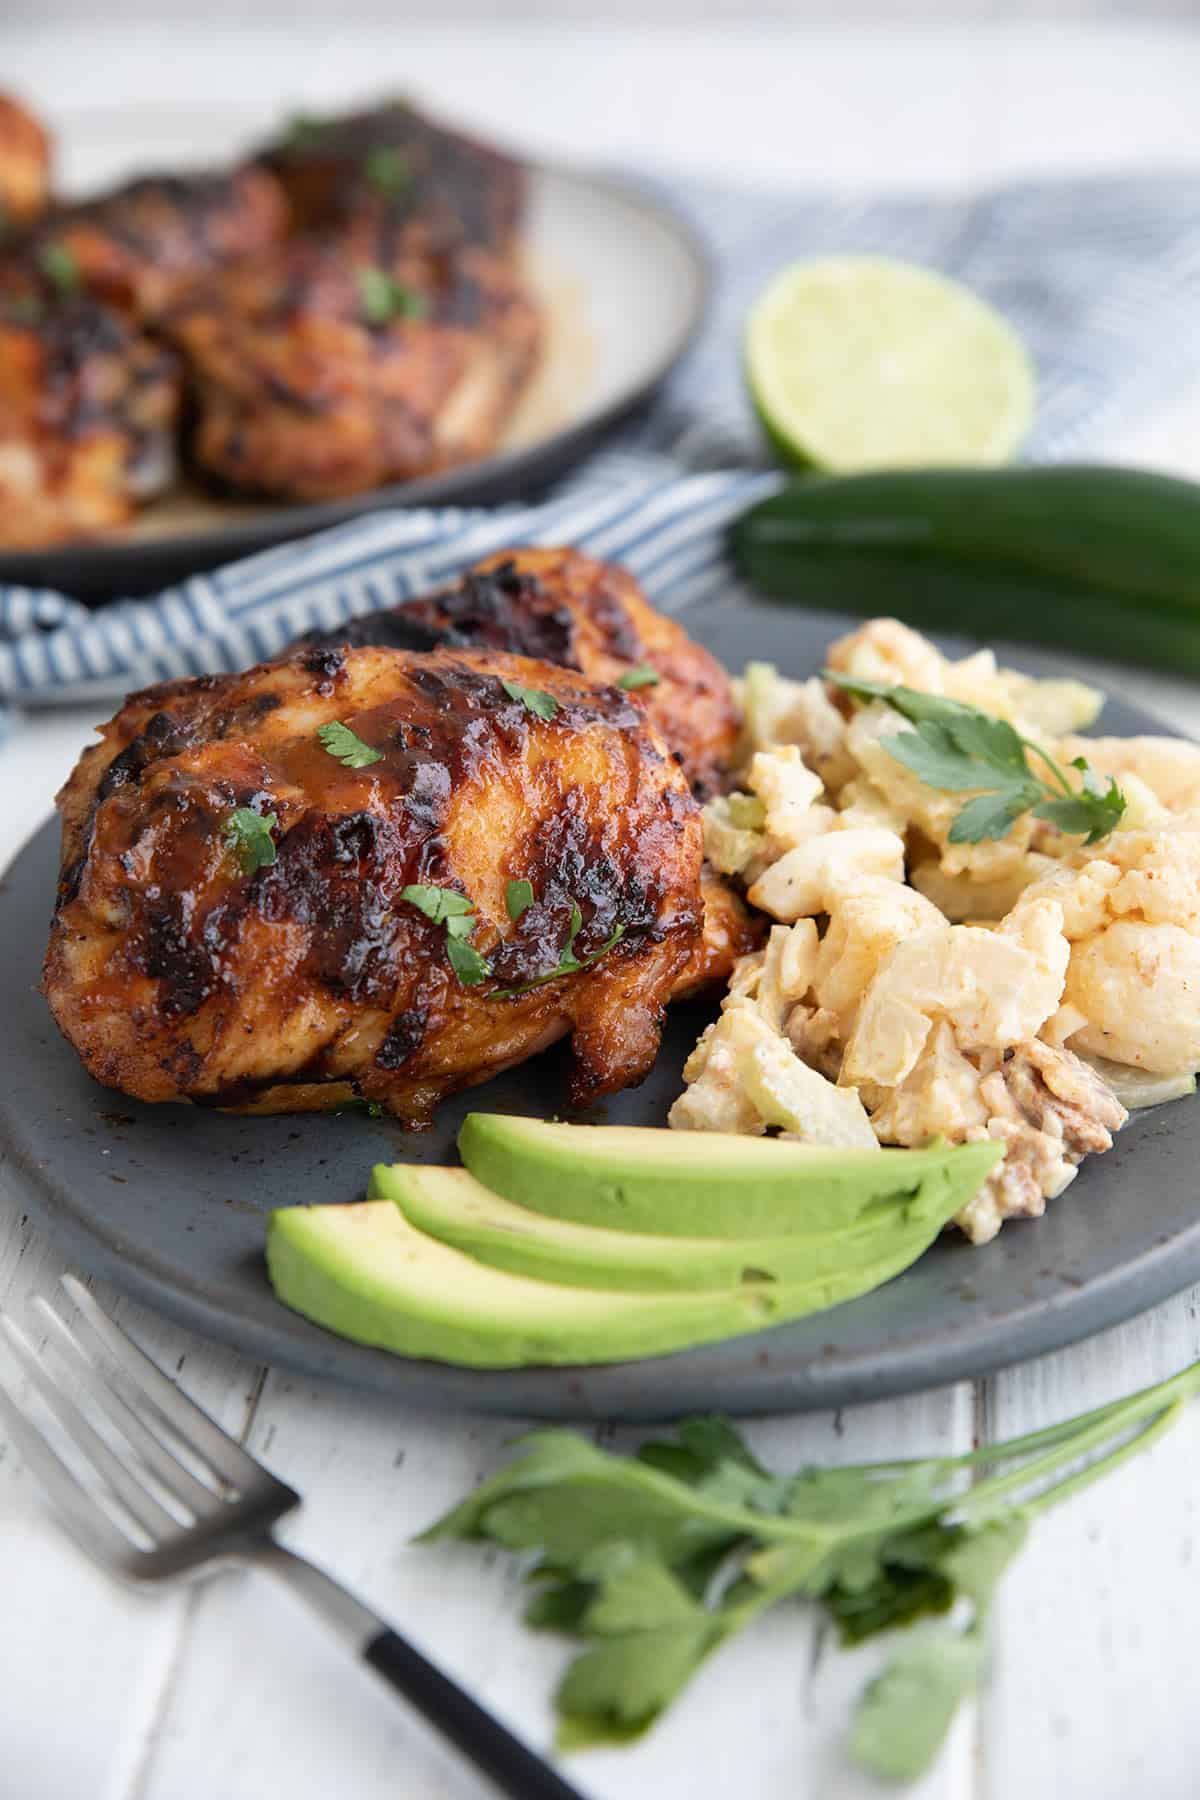 Two chipotle lime chicken thighs on a gray plate with cauliflower potato salad and avocado.